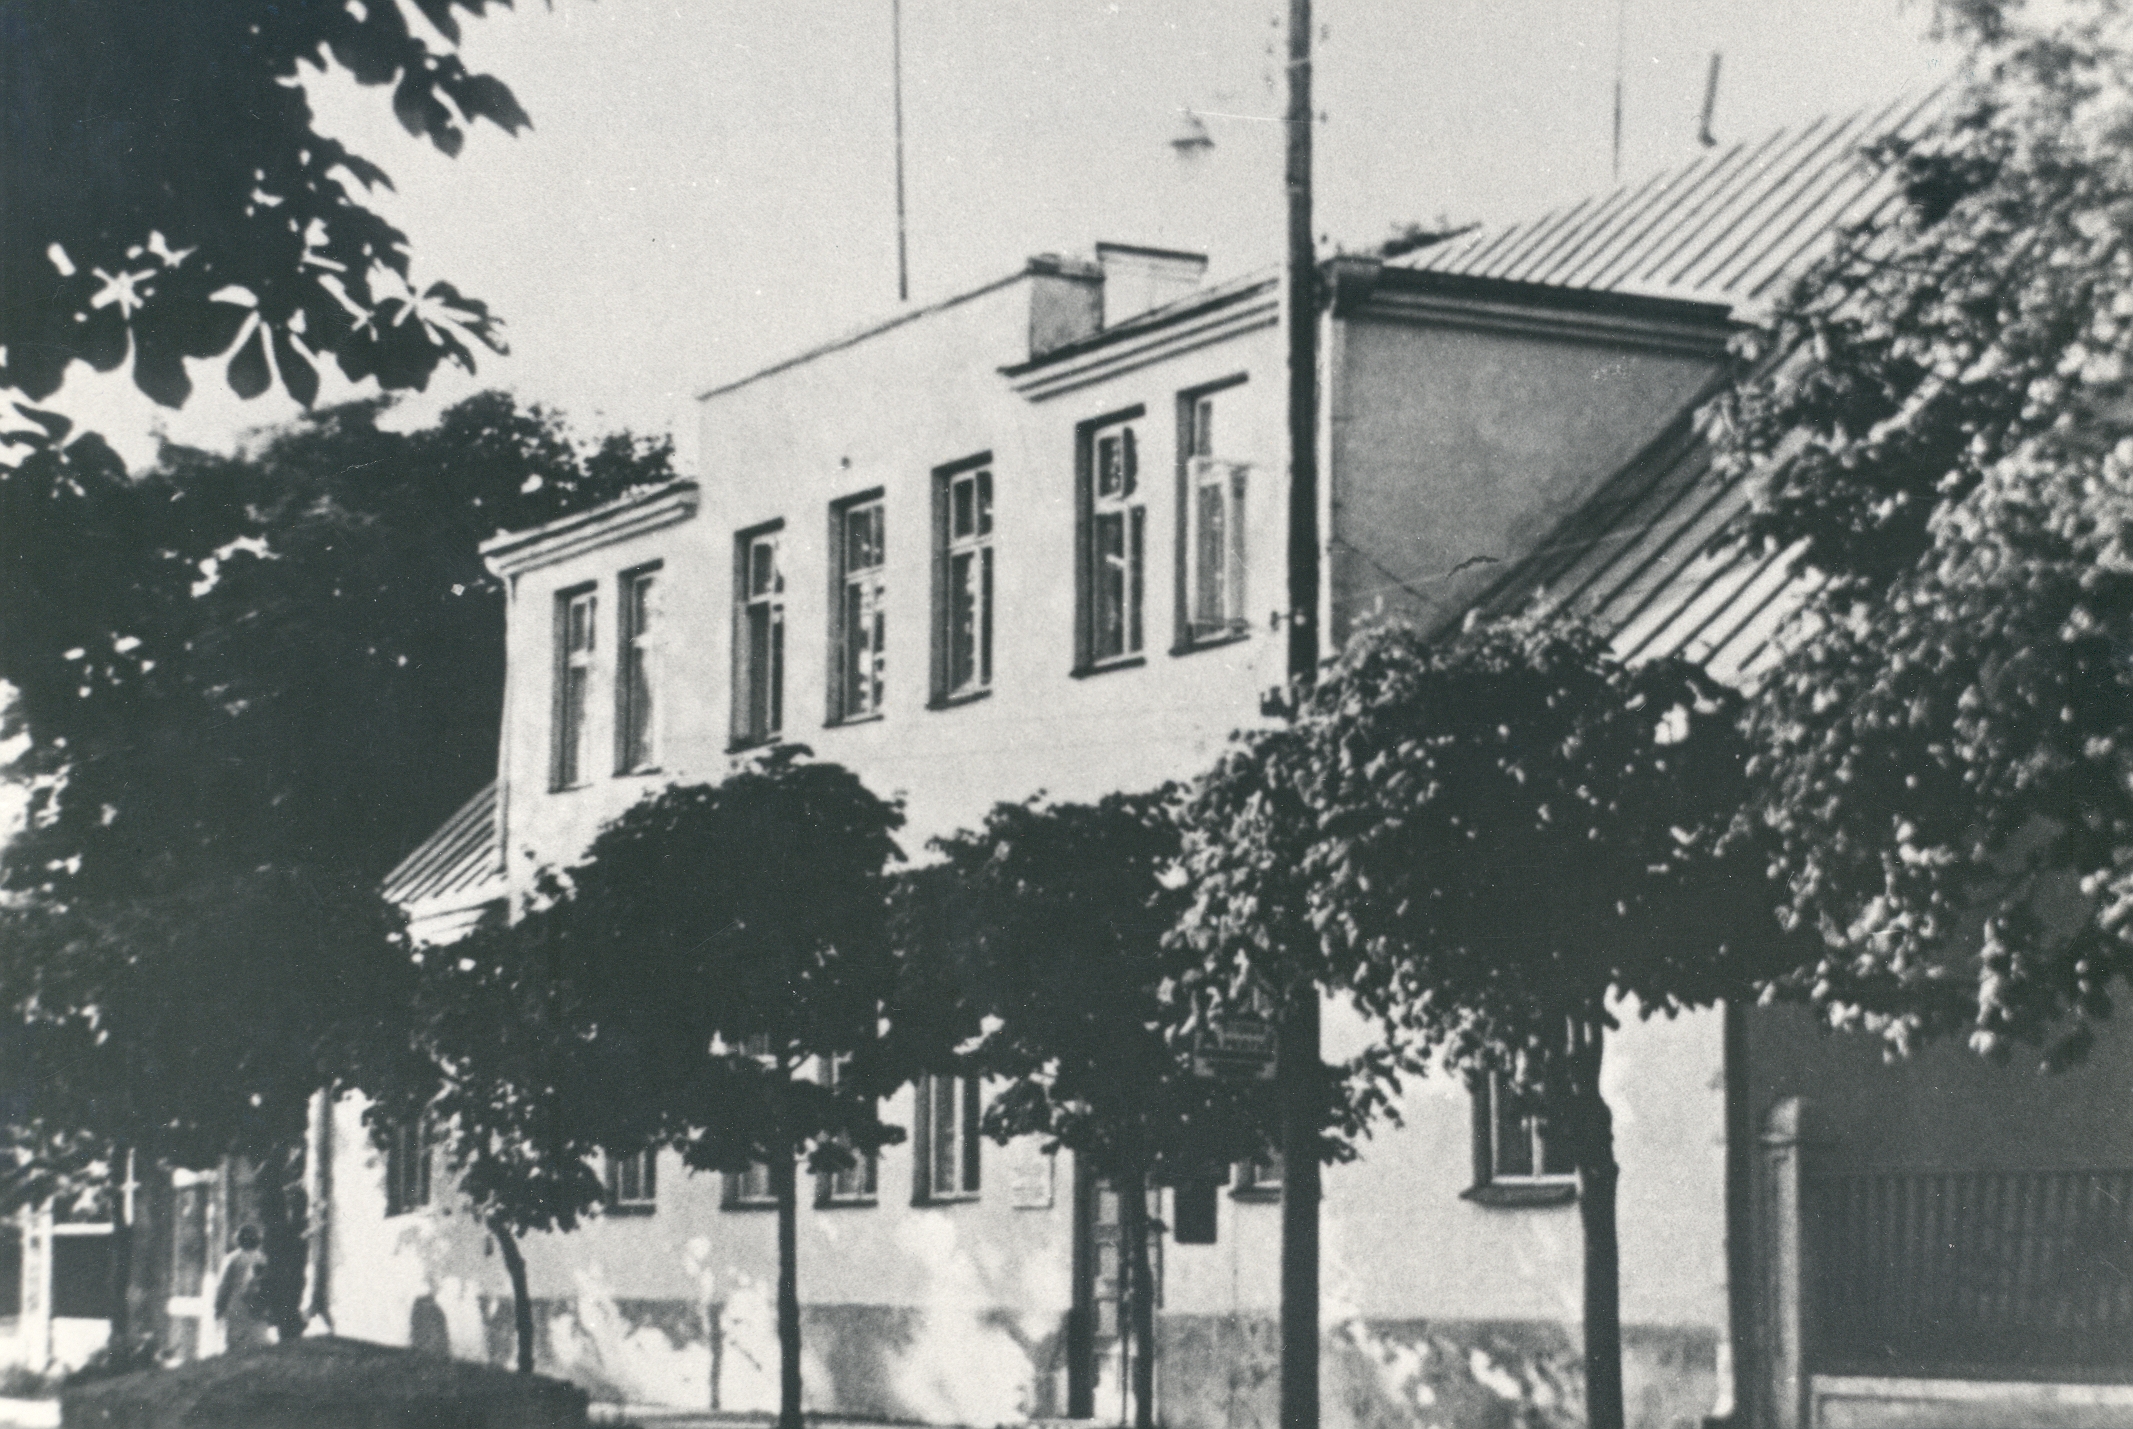 Building of Läänemaa Municipality, which Ernst Enno worked as a school advisor in the education department (II floor)